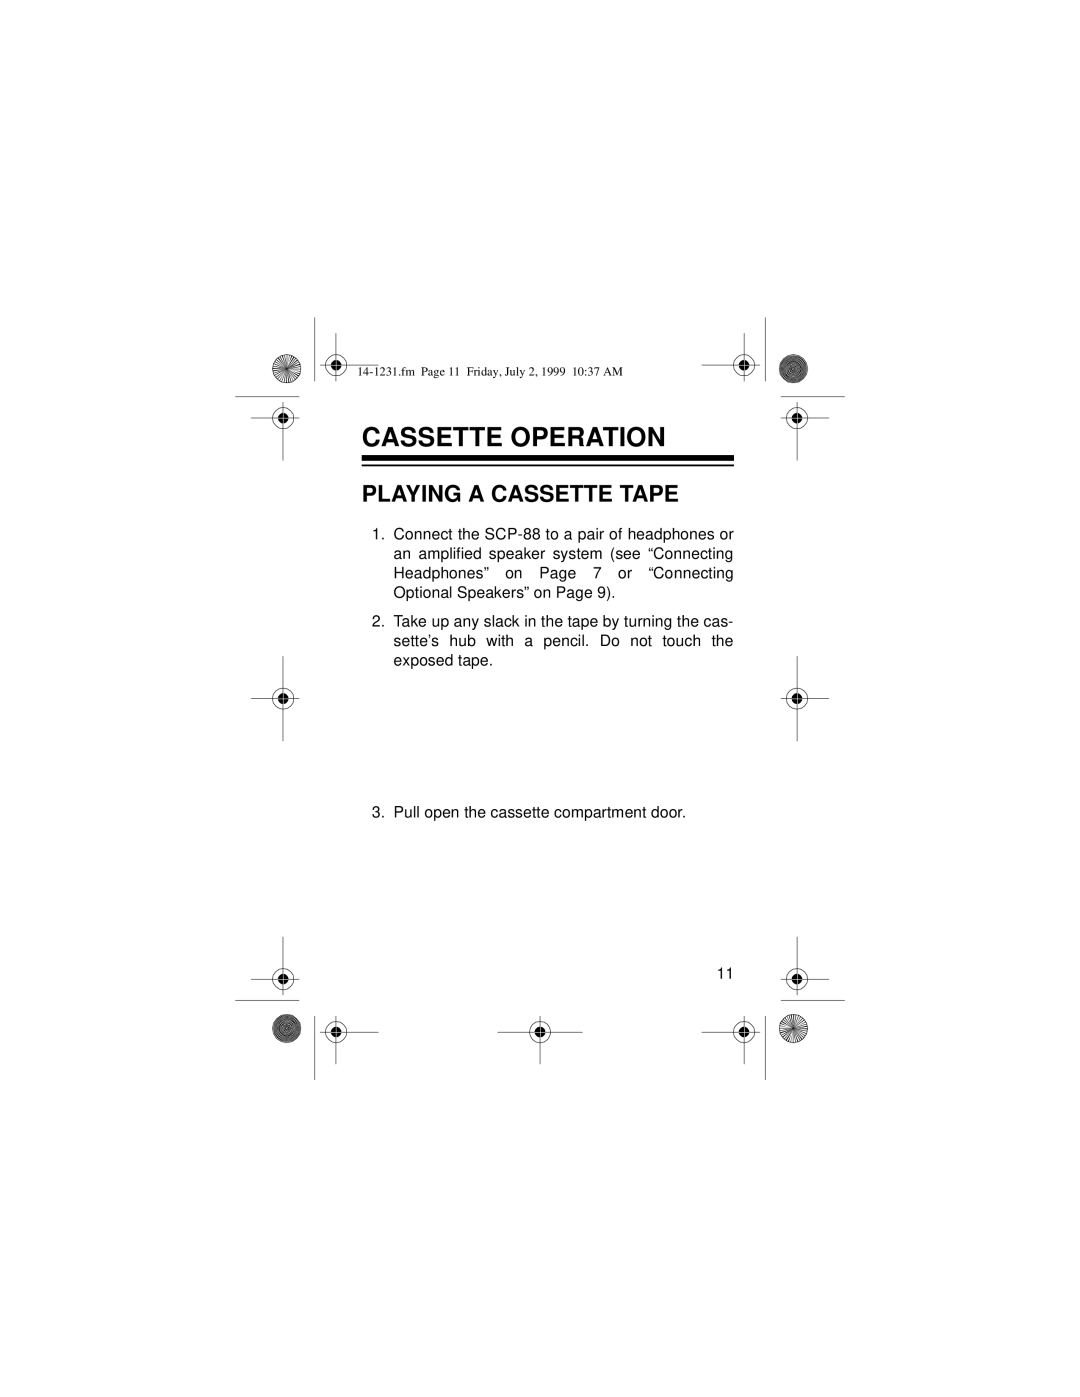 Optimus SCP-88 owner manual Cassette Operation, Playing A Cassette Tape 